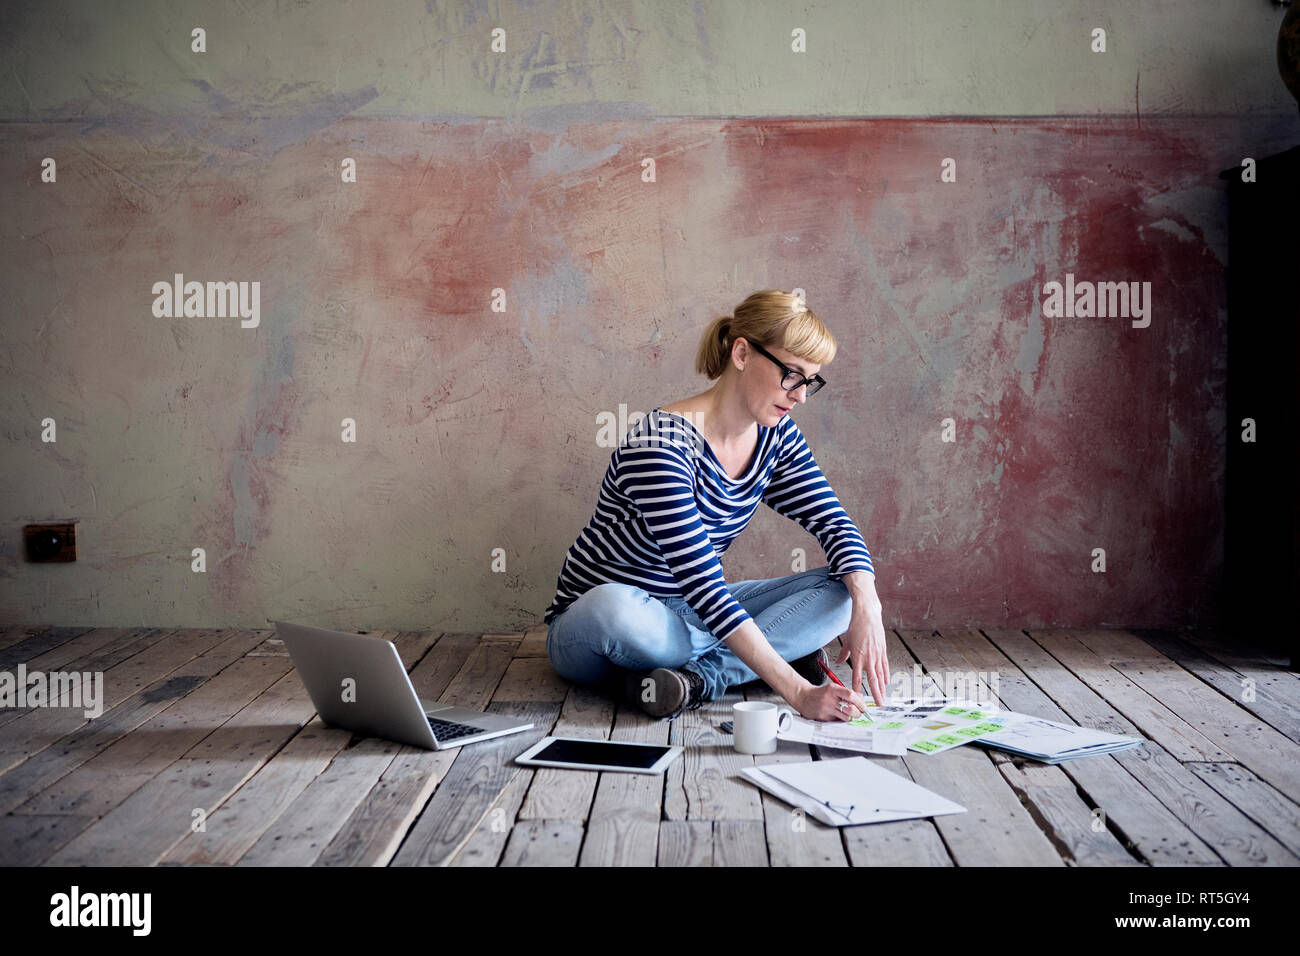 Woman sitting on wooden floor in an unrenovated room of a loft working Stock Photo